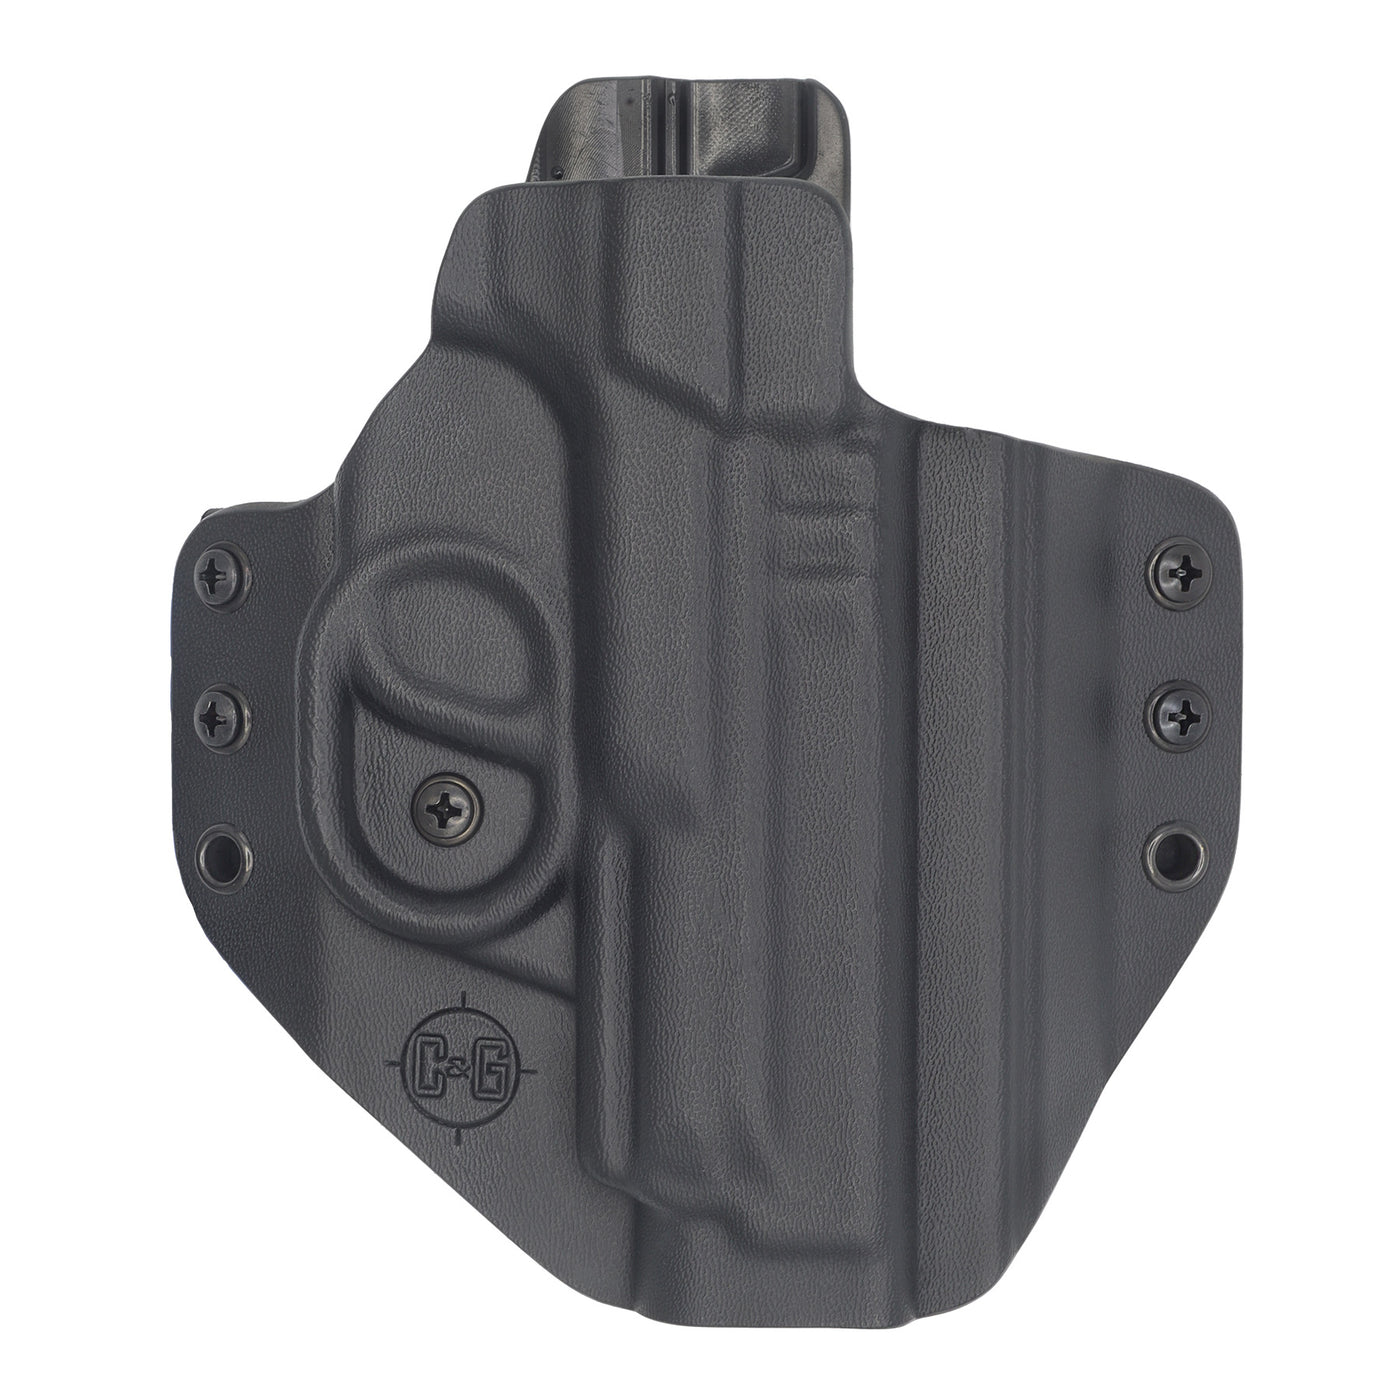 C&G Holsters quick ship Covert OWB kydex holster for Smith & Wesson M&P 2.0 9/40 4.25" front view without gun